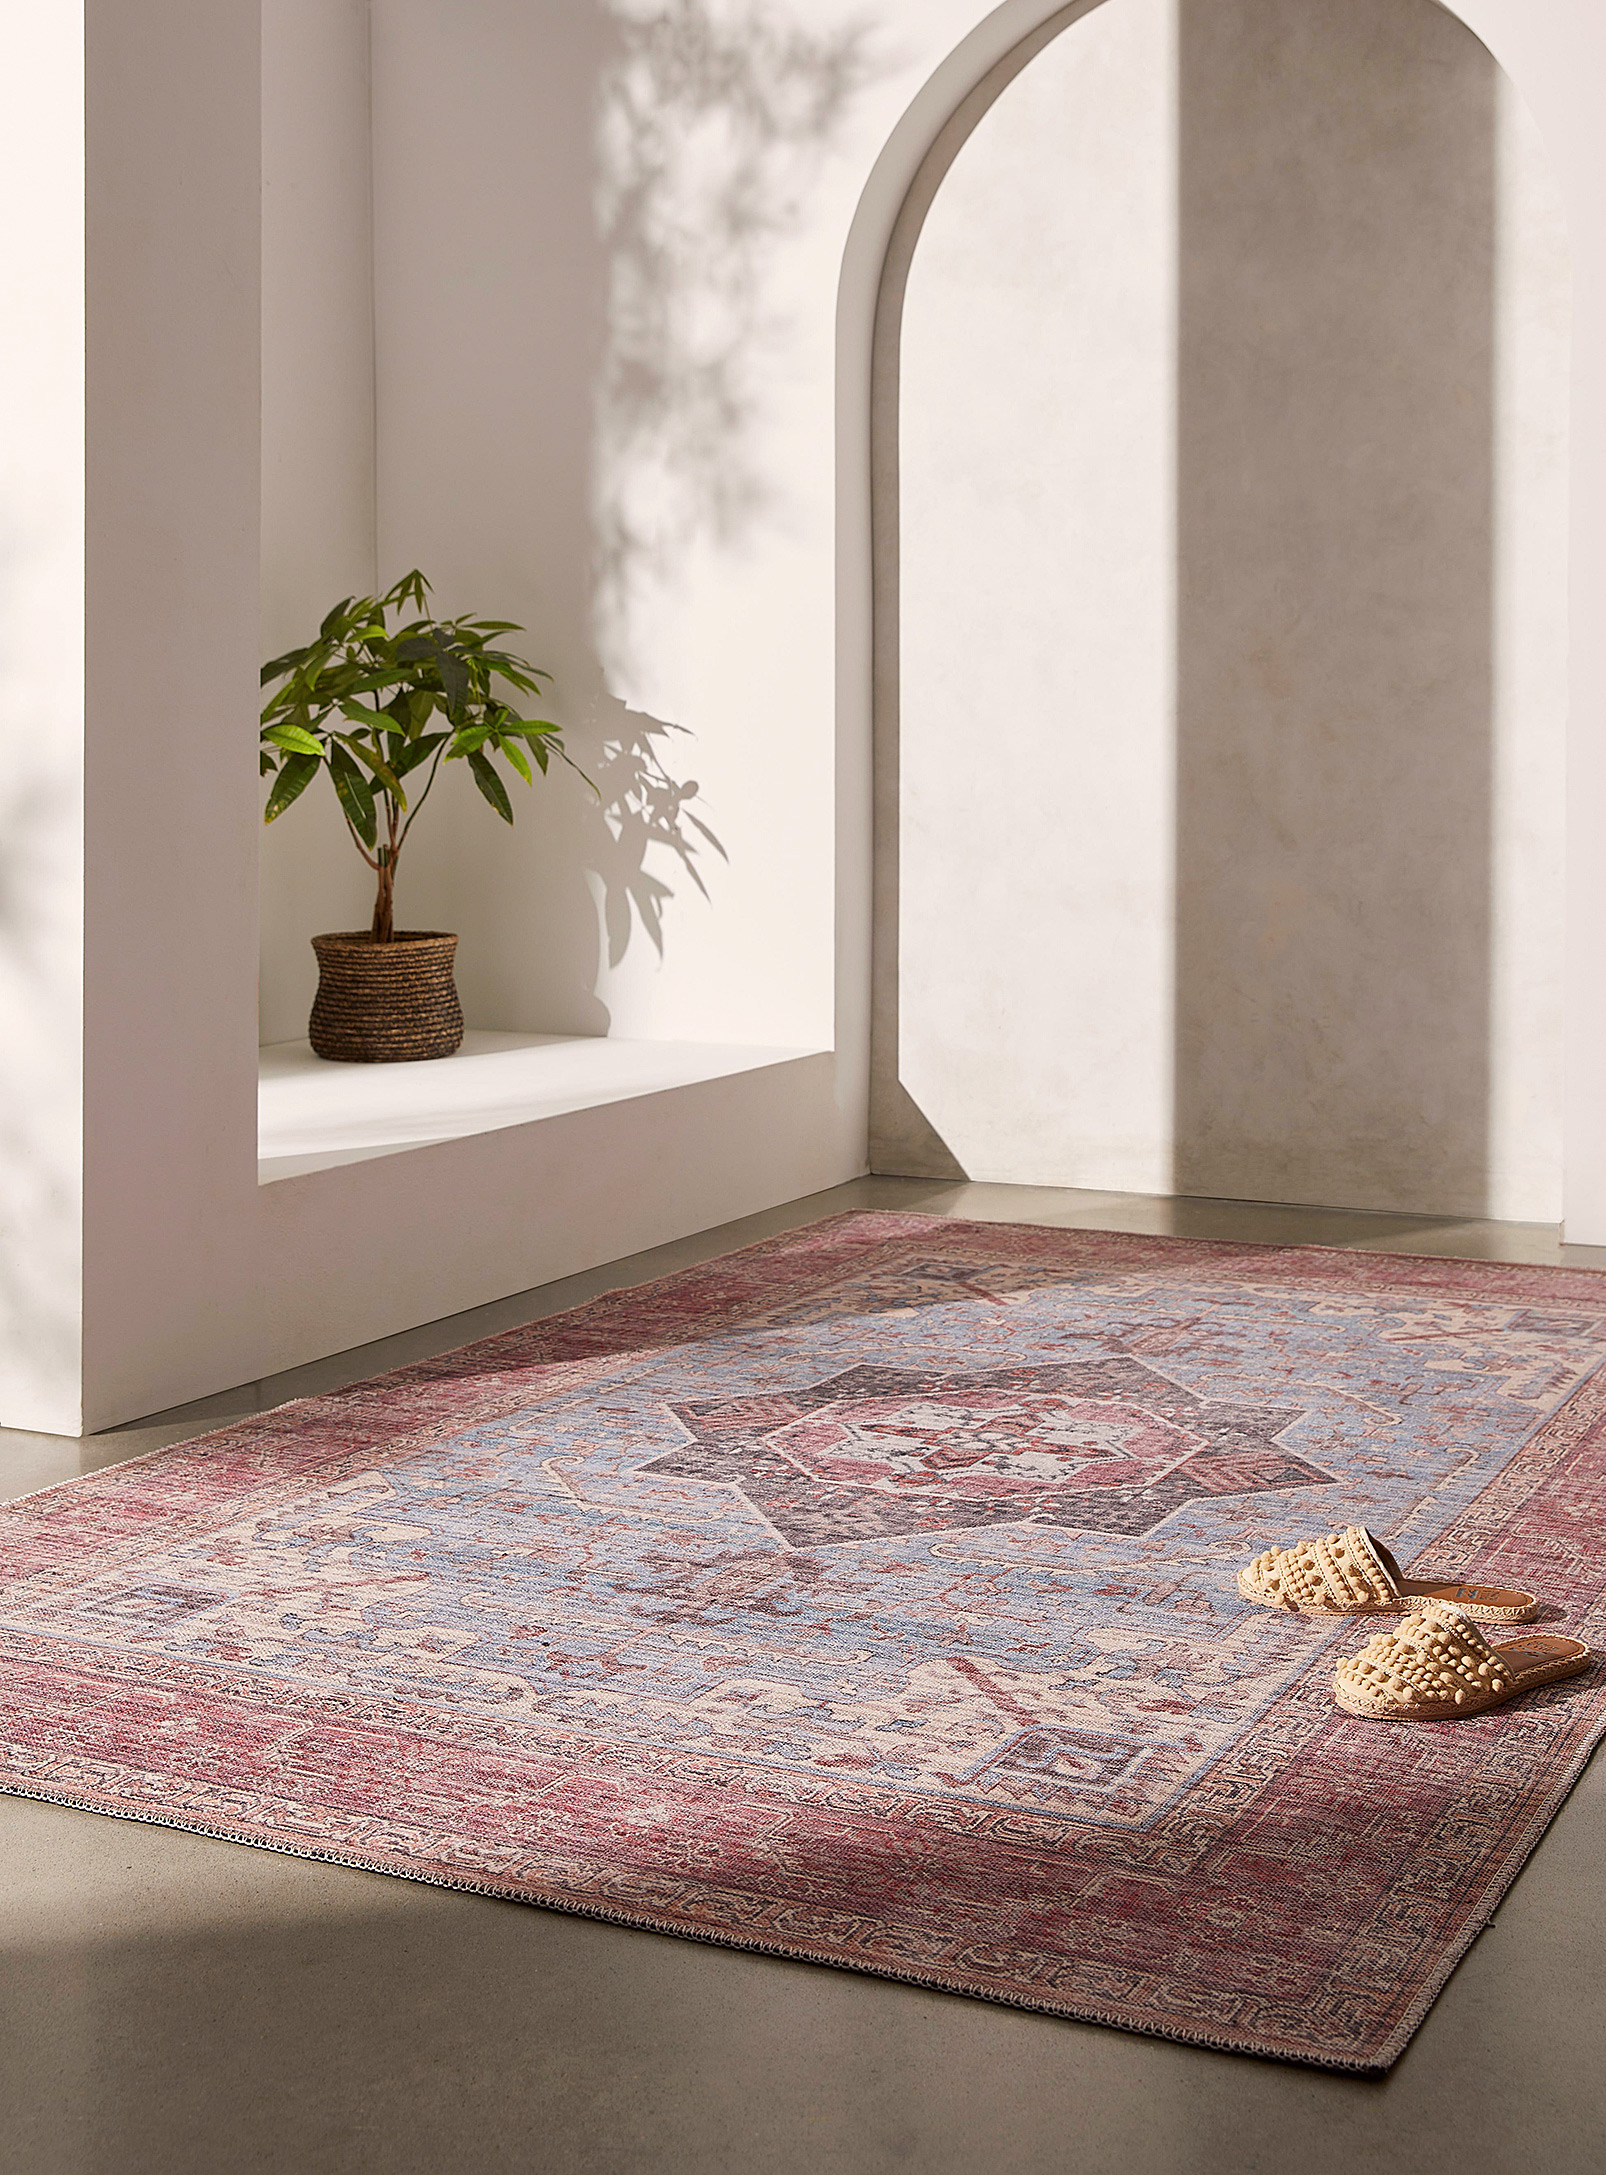 Simons Maison - Ancient heritage rug See available sizes